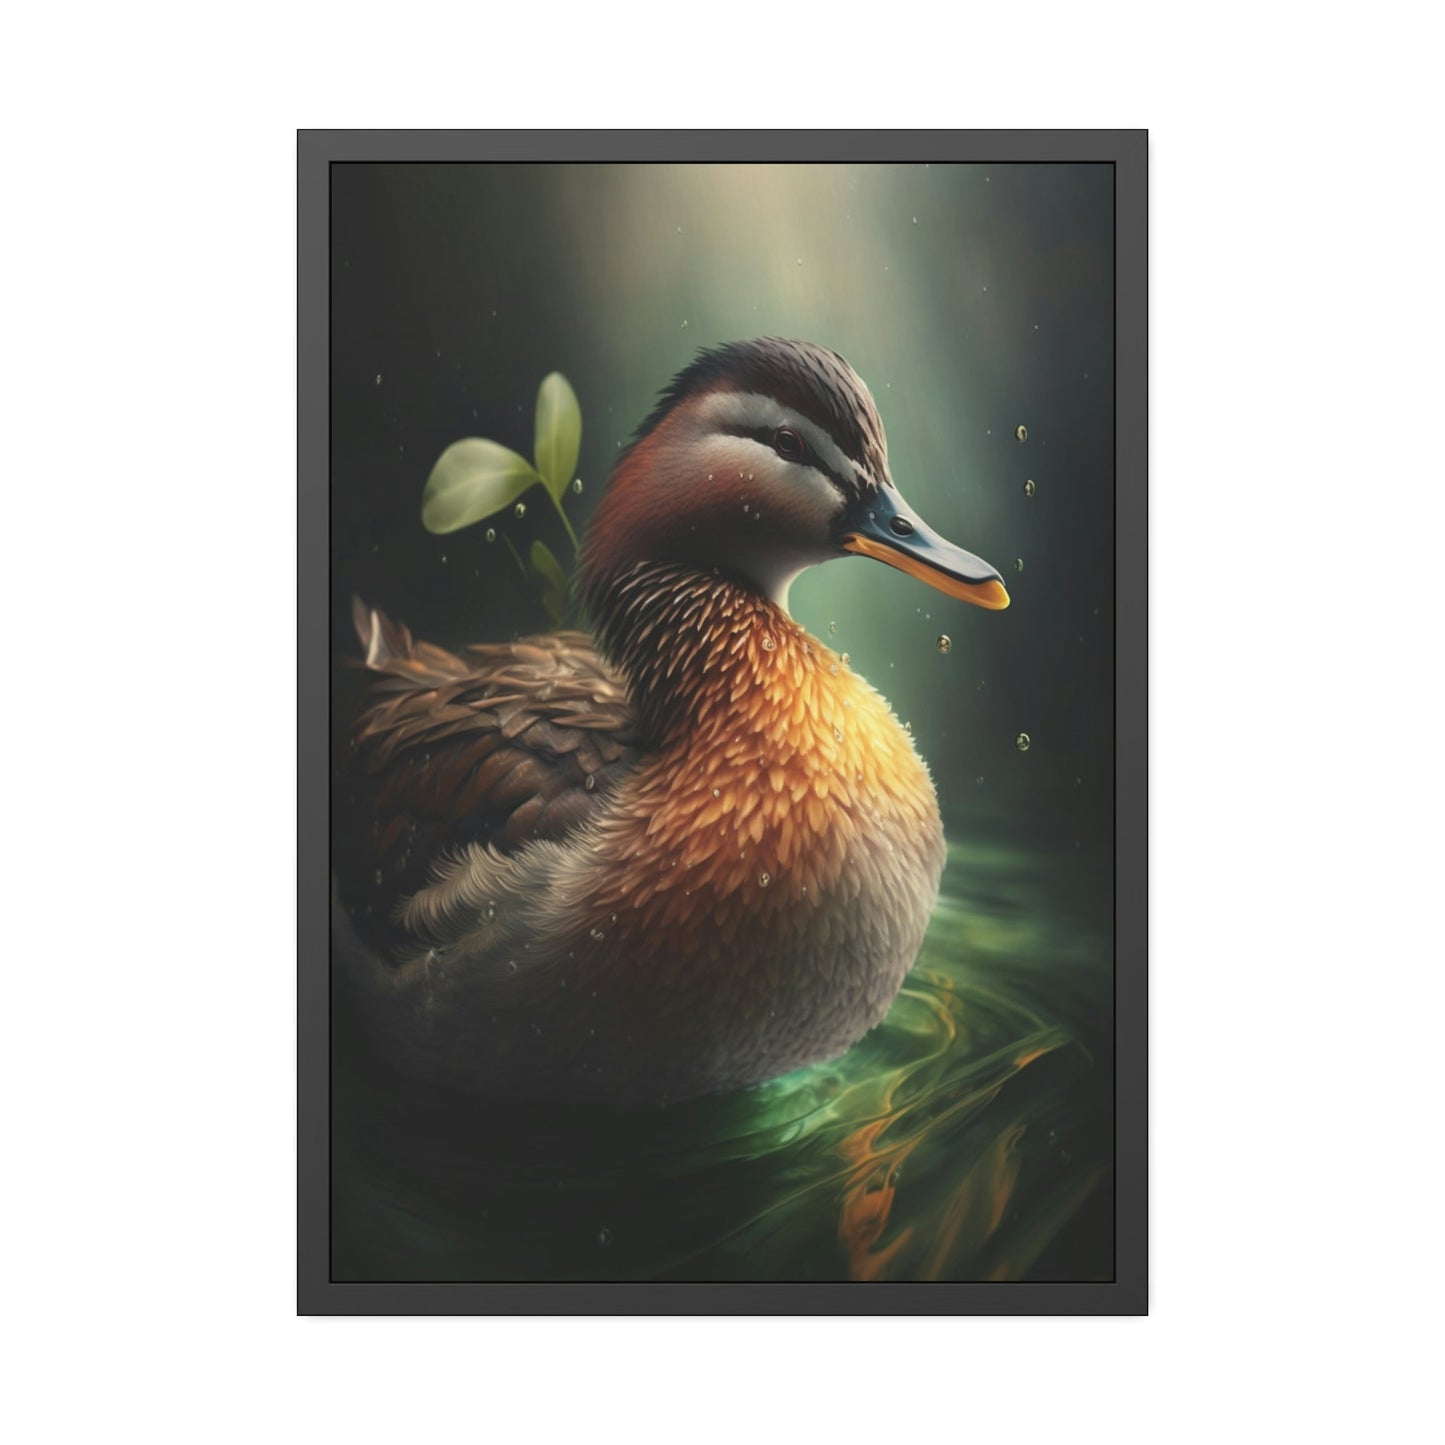 Graceful Waterfowl: A Painting of Duck in Motion